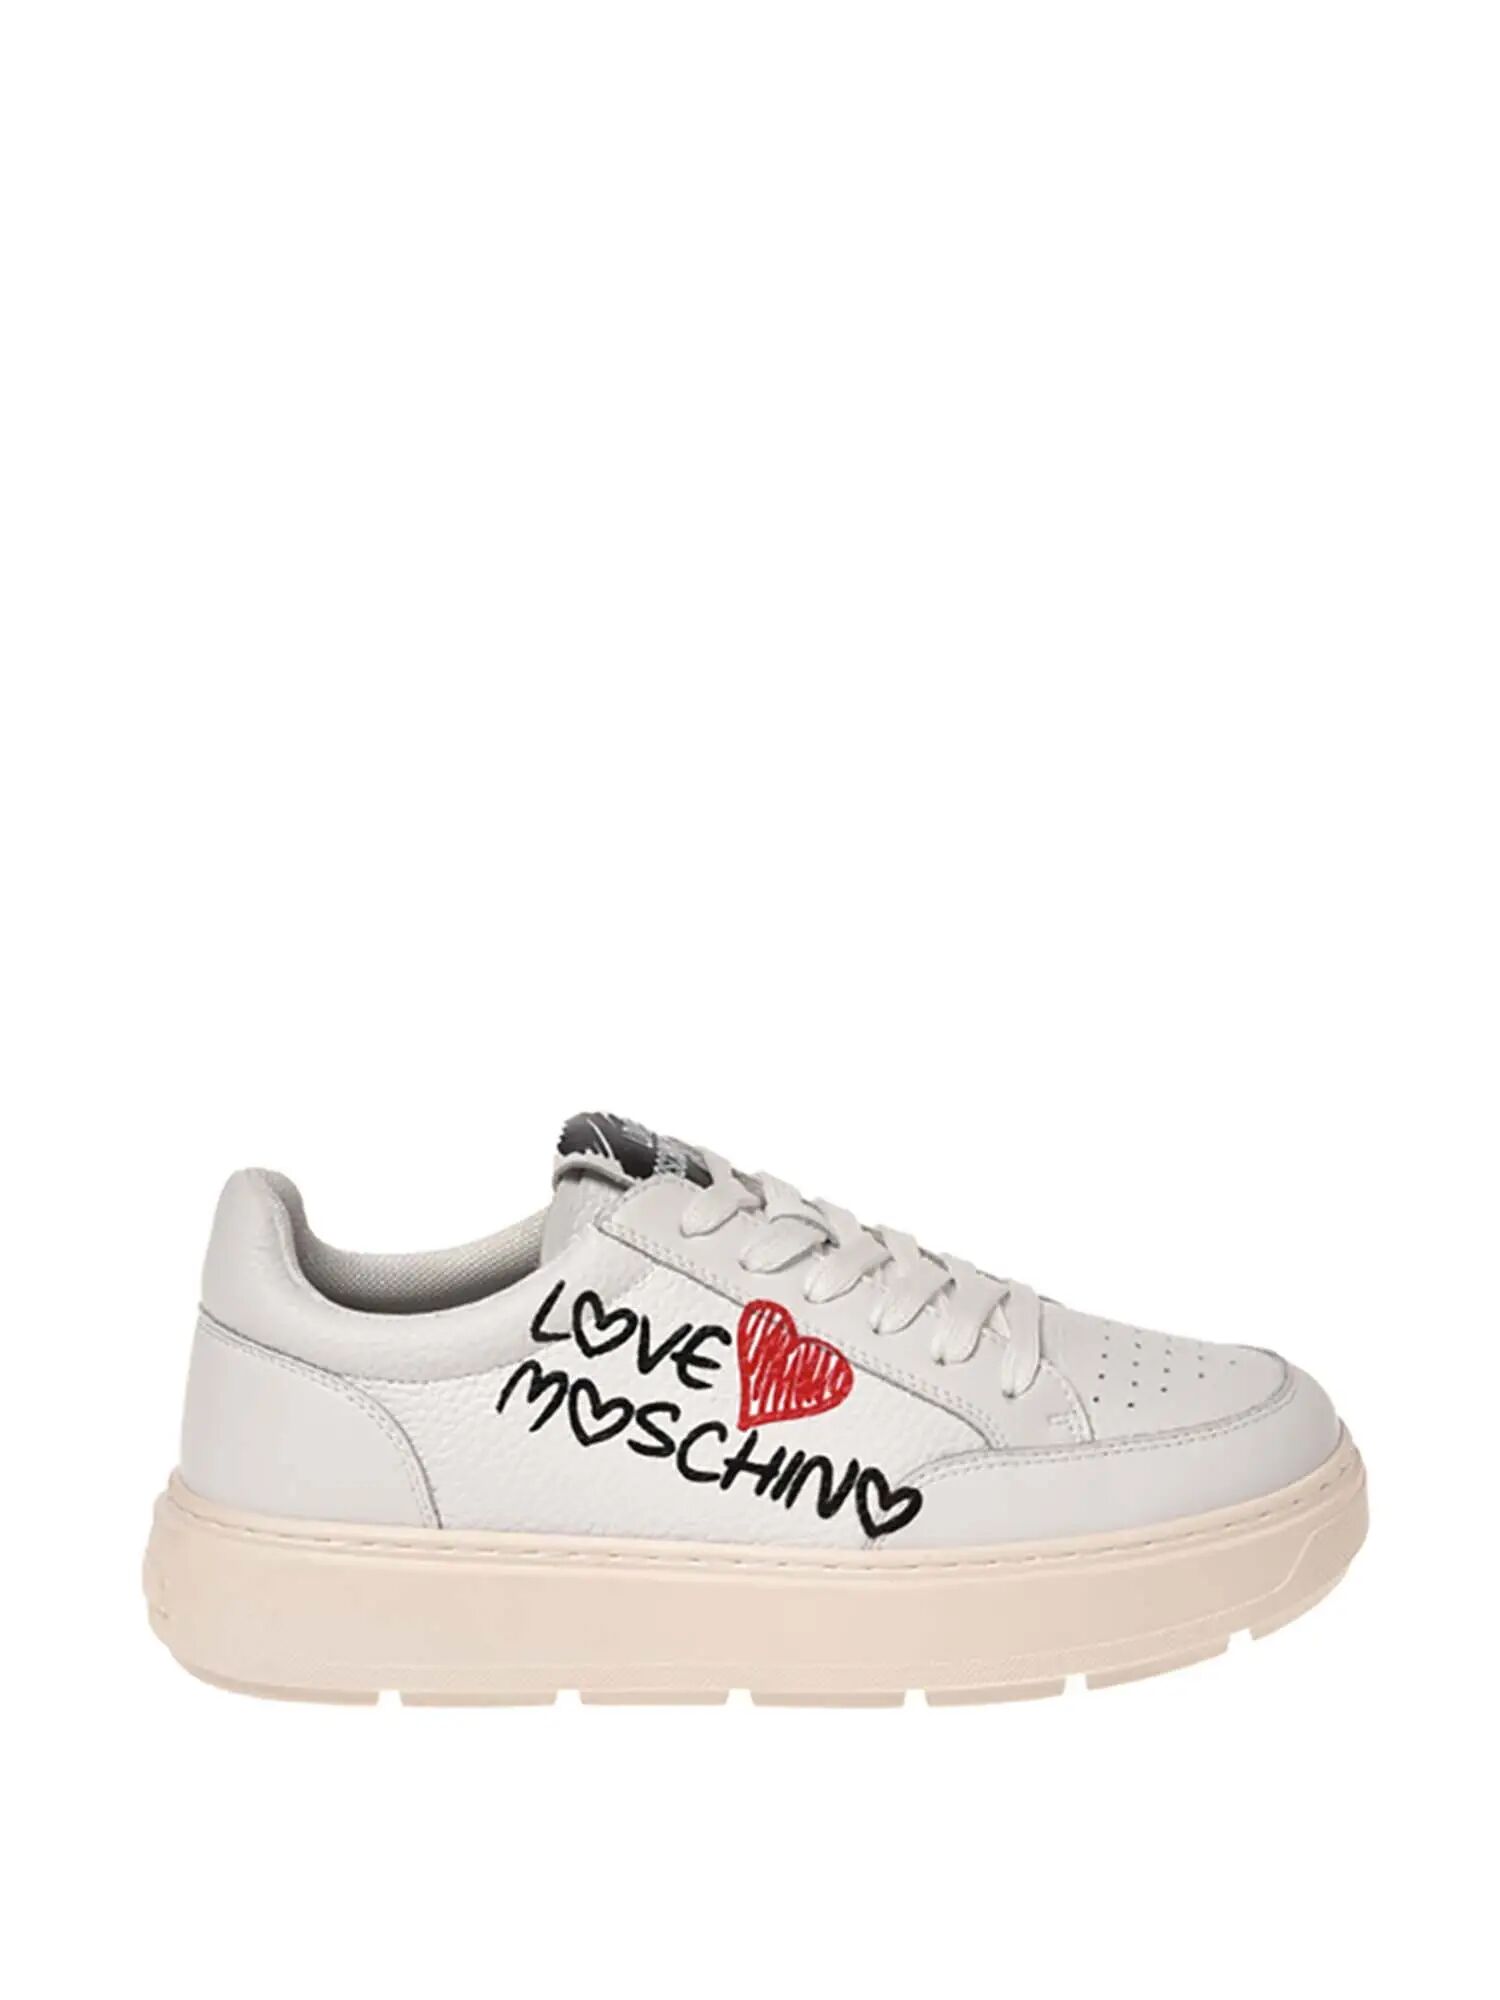 Moschino Sneakers Bianche Donna BIANCO 35